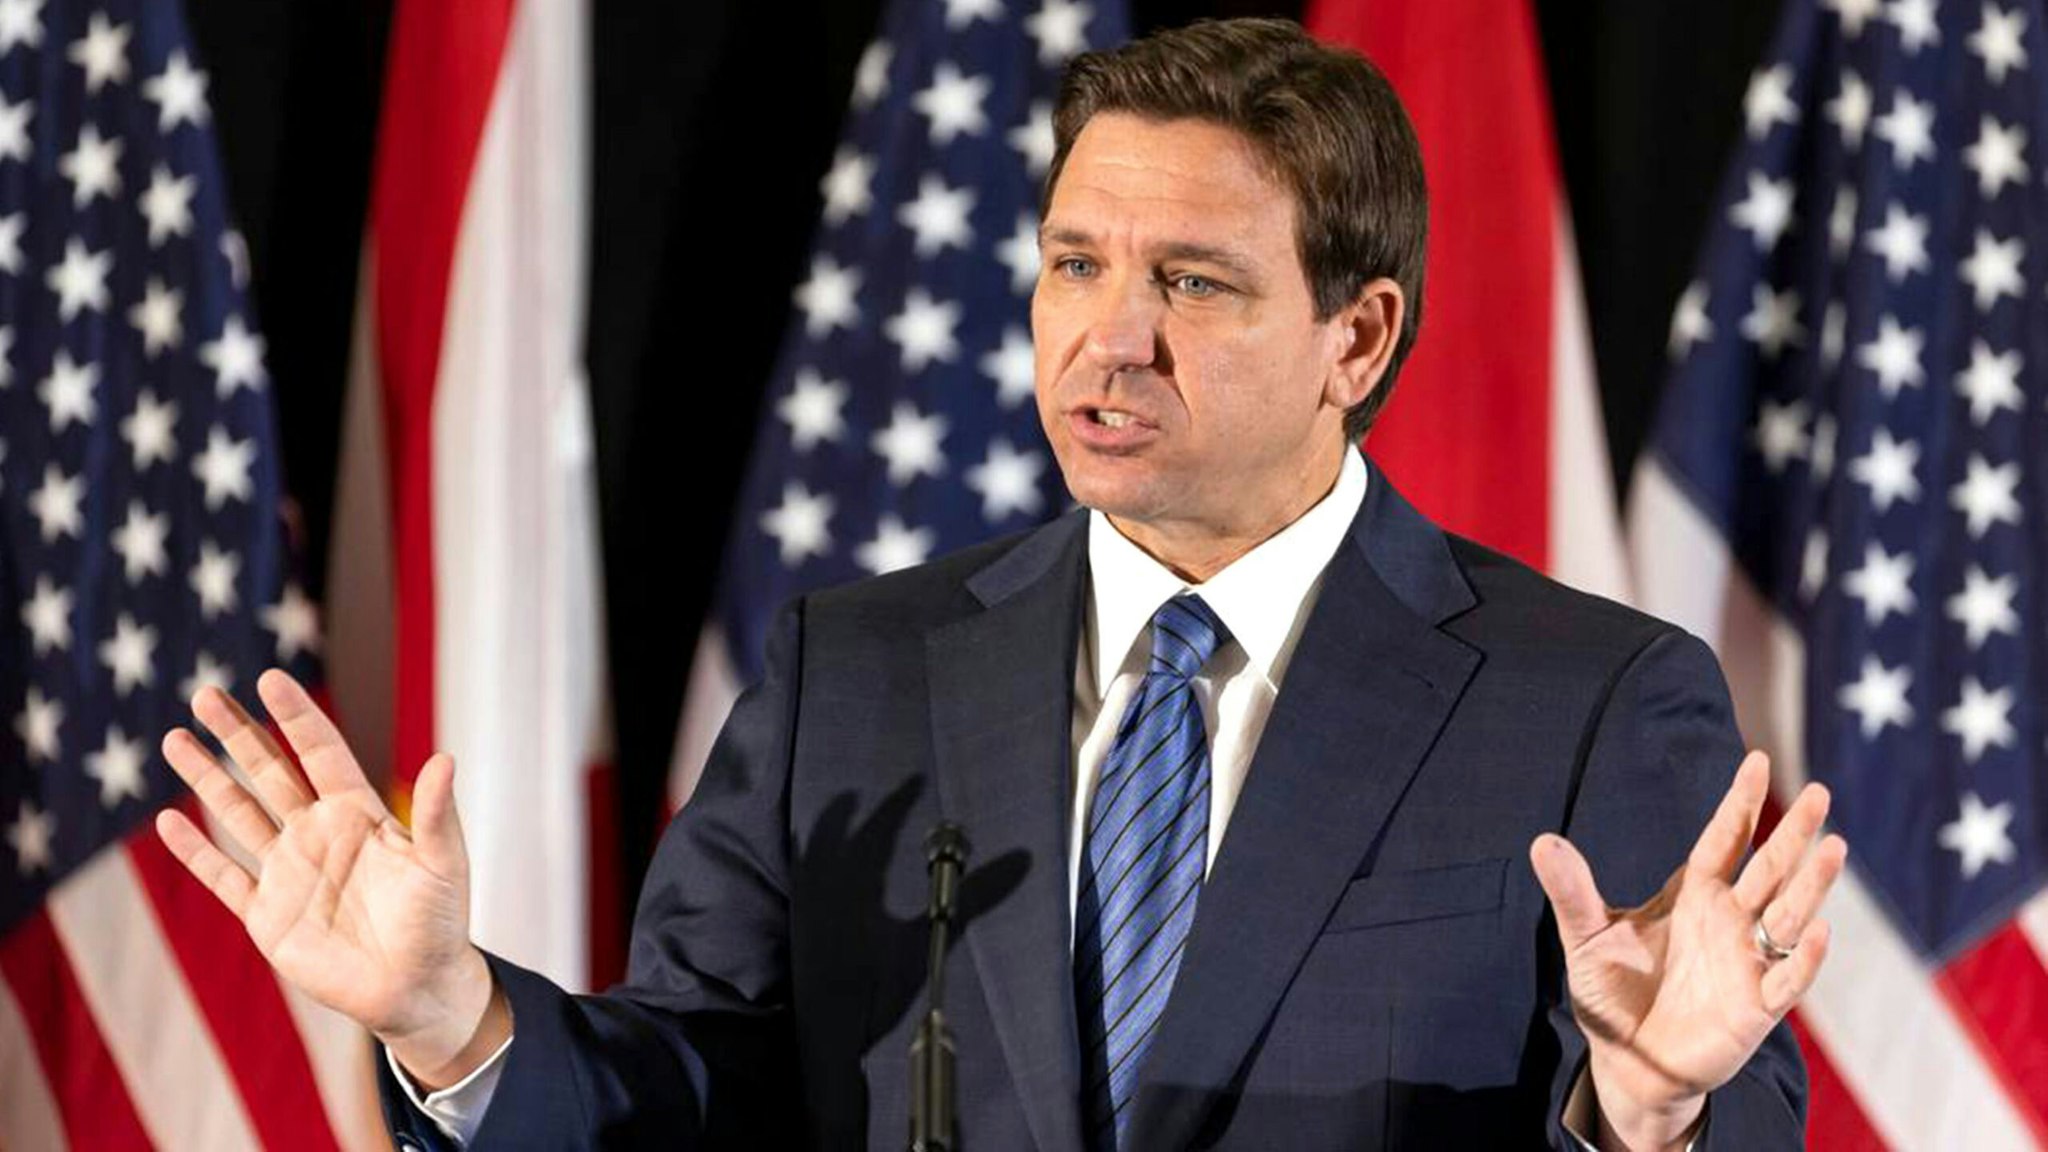 Florida Gov. Ron DeSantis during a press conference at Christopher Columbus High School on Monday, March 27, 2023, in Miami. The Republican almost won the Democratic stronghold in 2022, and he&apos;s picked Miami for his first donor event after announcing his 2024 presidential run.